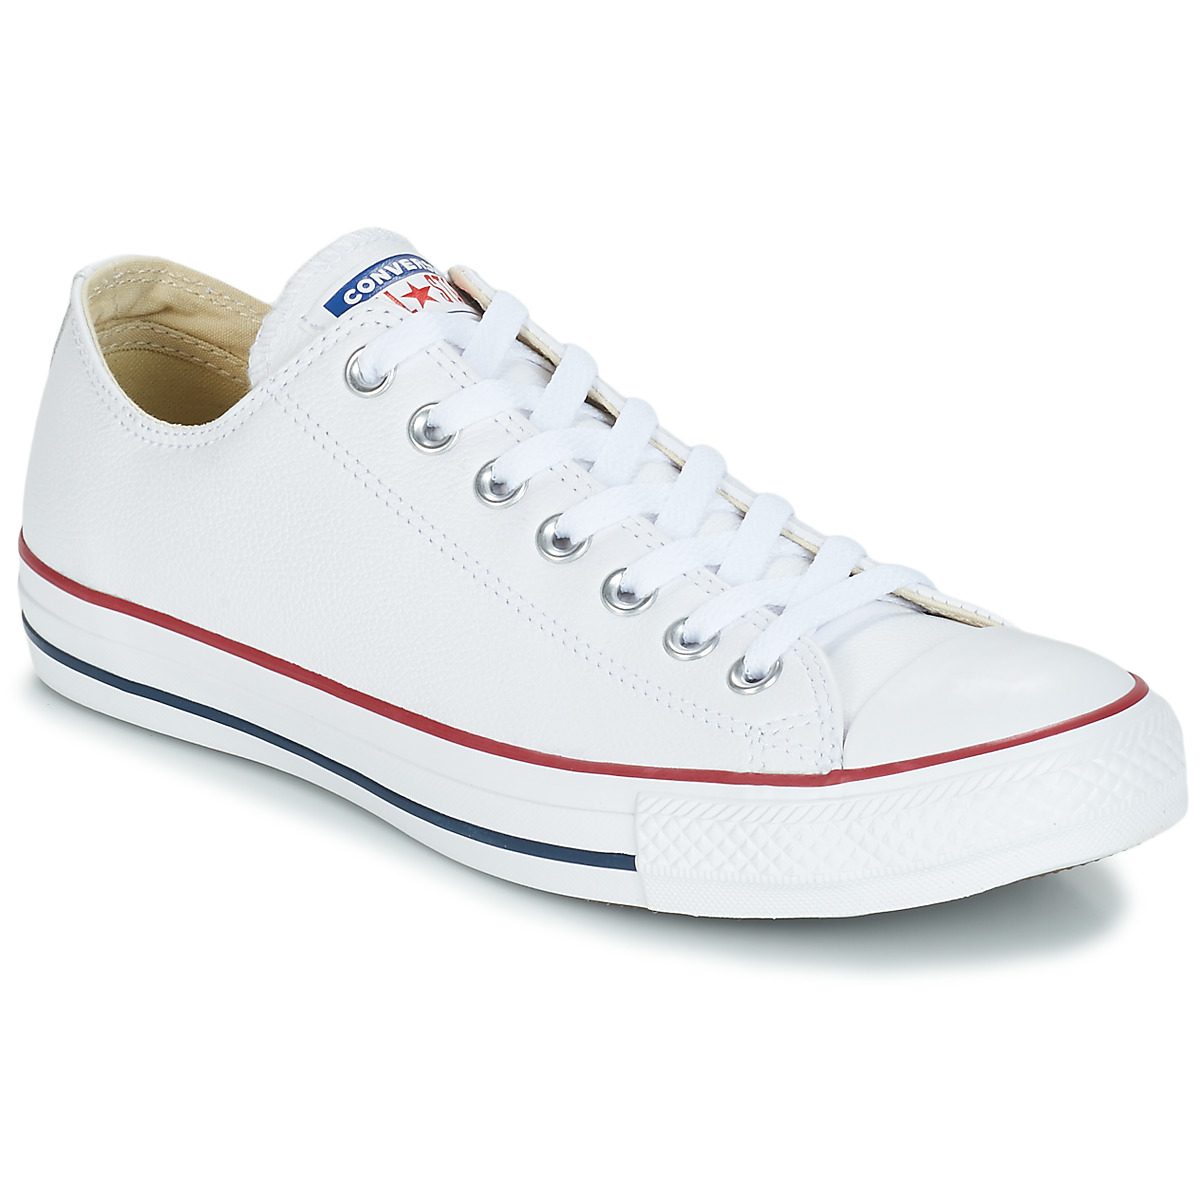 Kengät Converse Chuck Taylor All Star CORE LEATHER OX 39